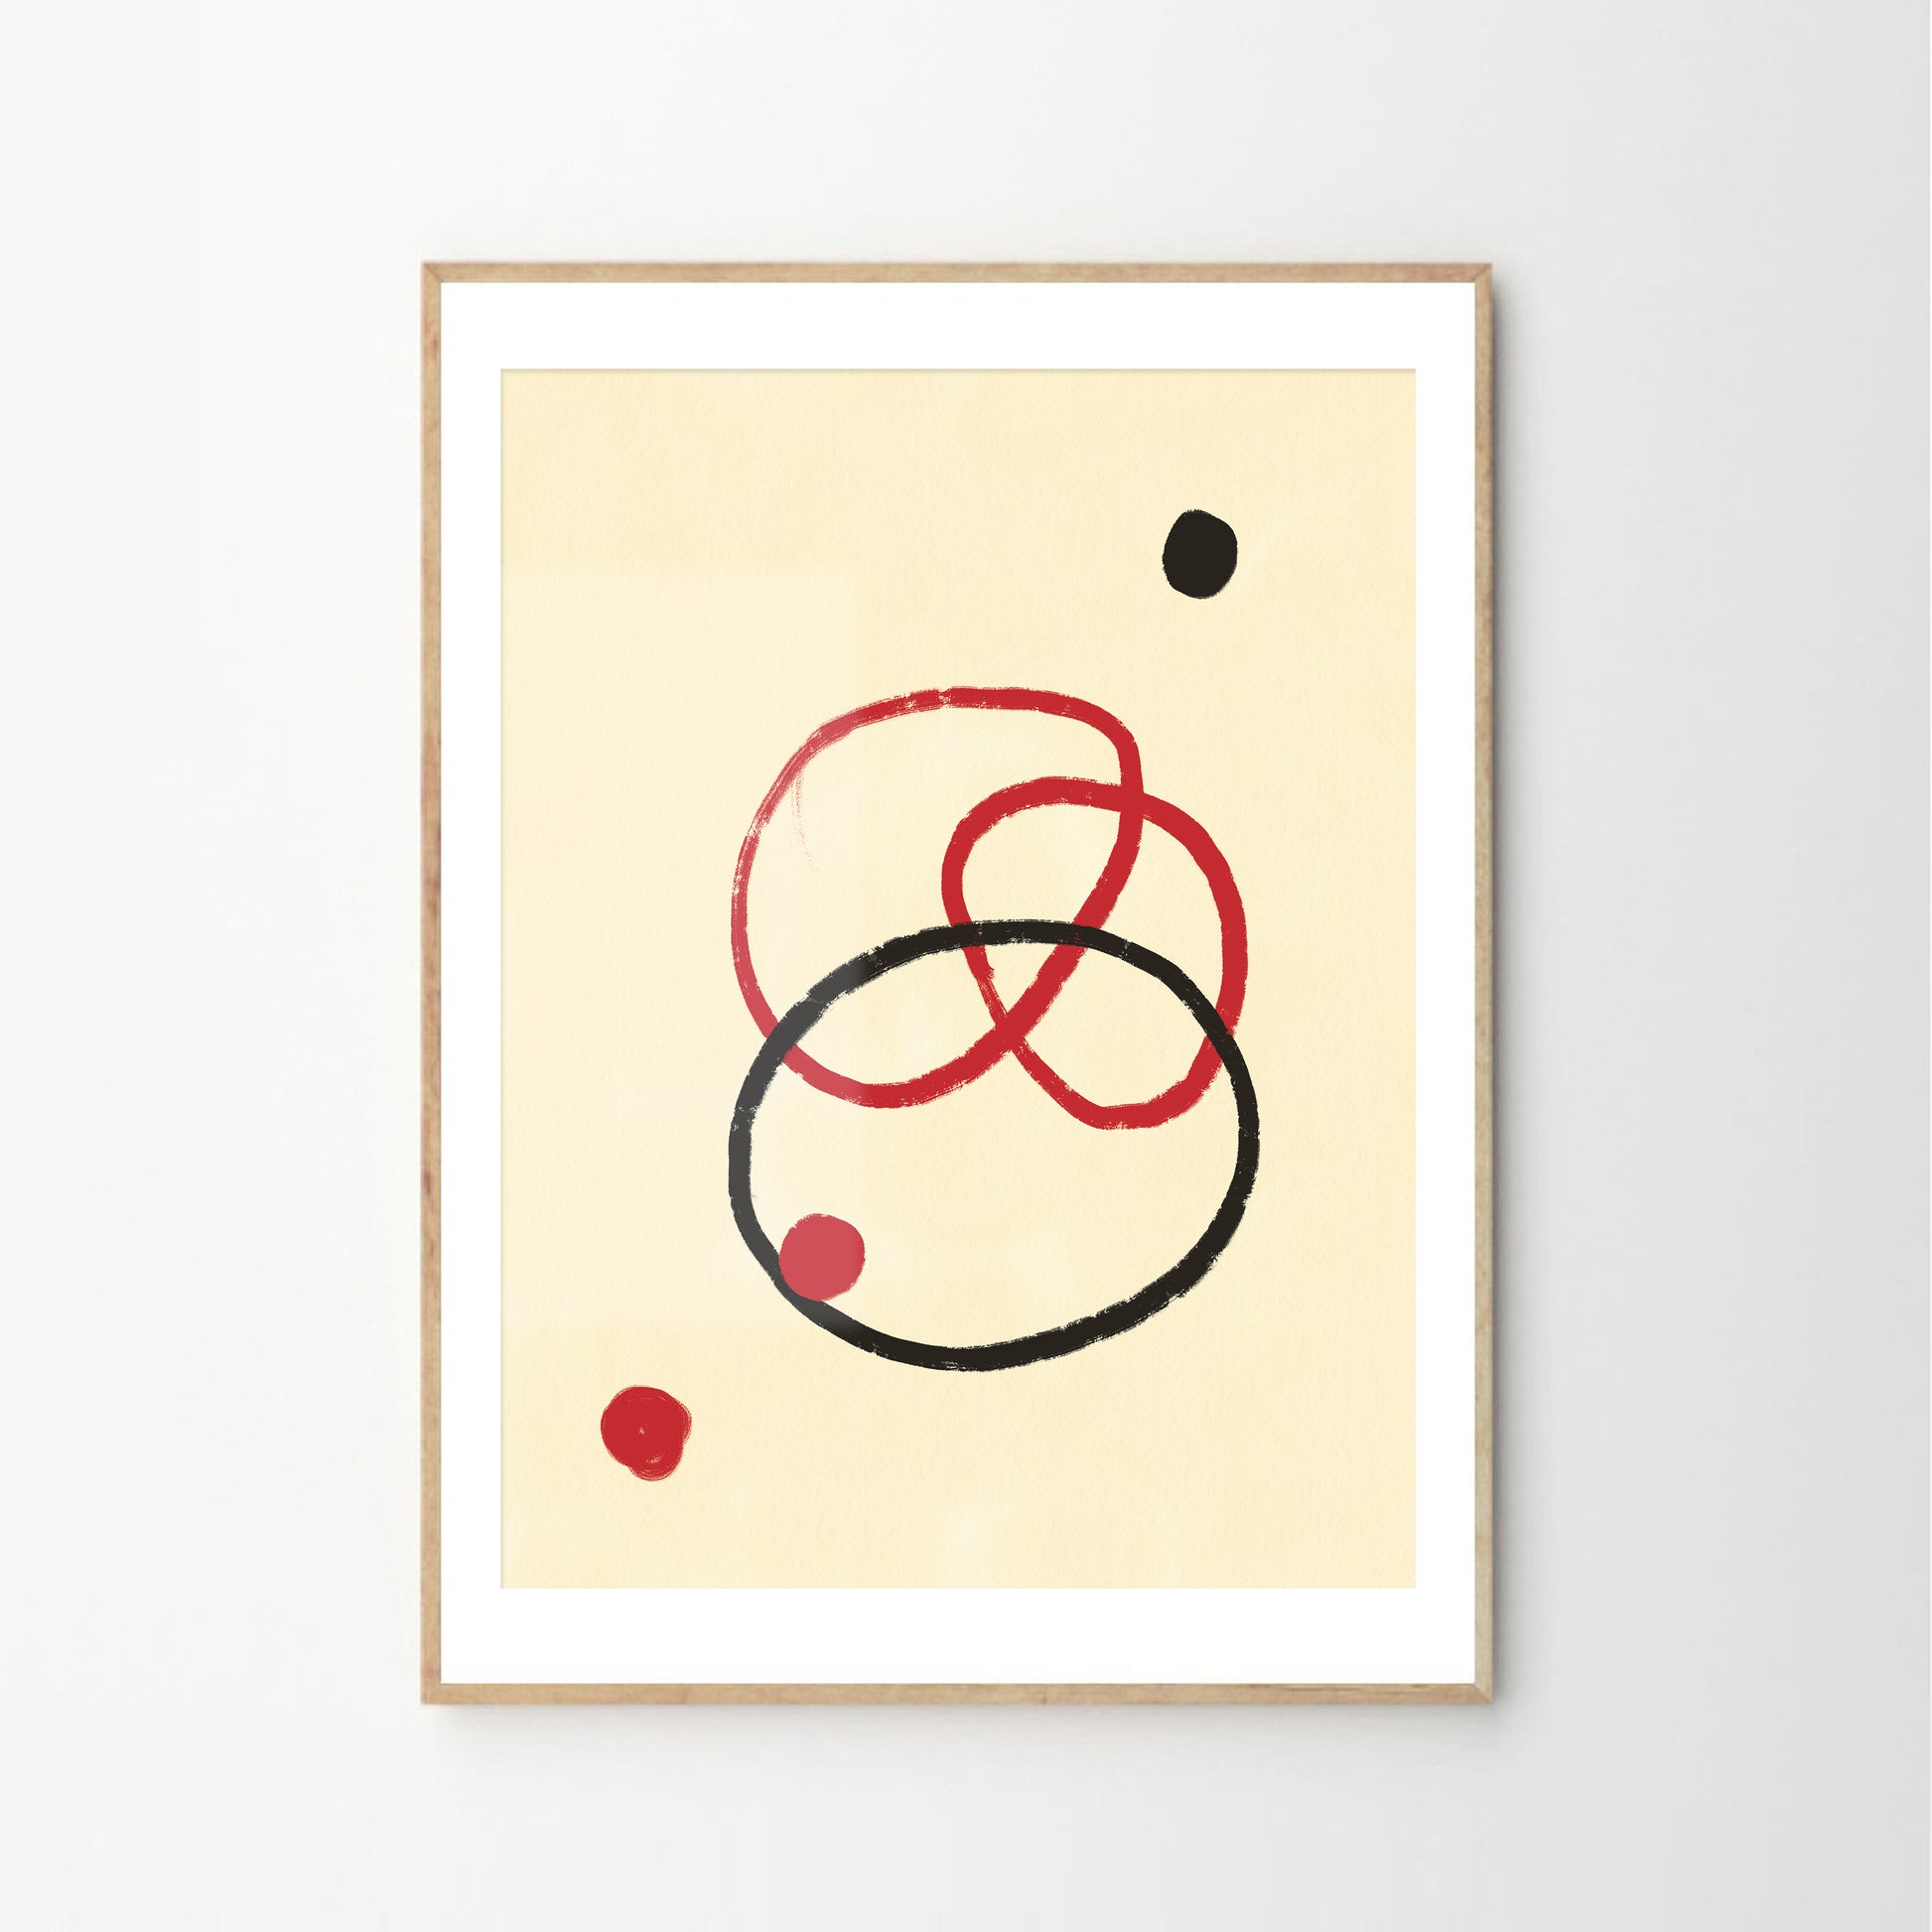 Minimalist art prints, Giclée print, Hahnemühle Photo Rag paper stock, archival quality for 100+ years